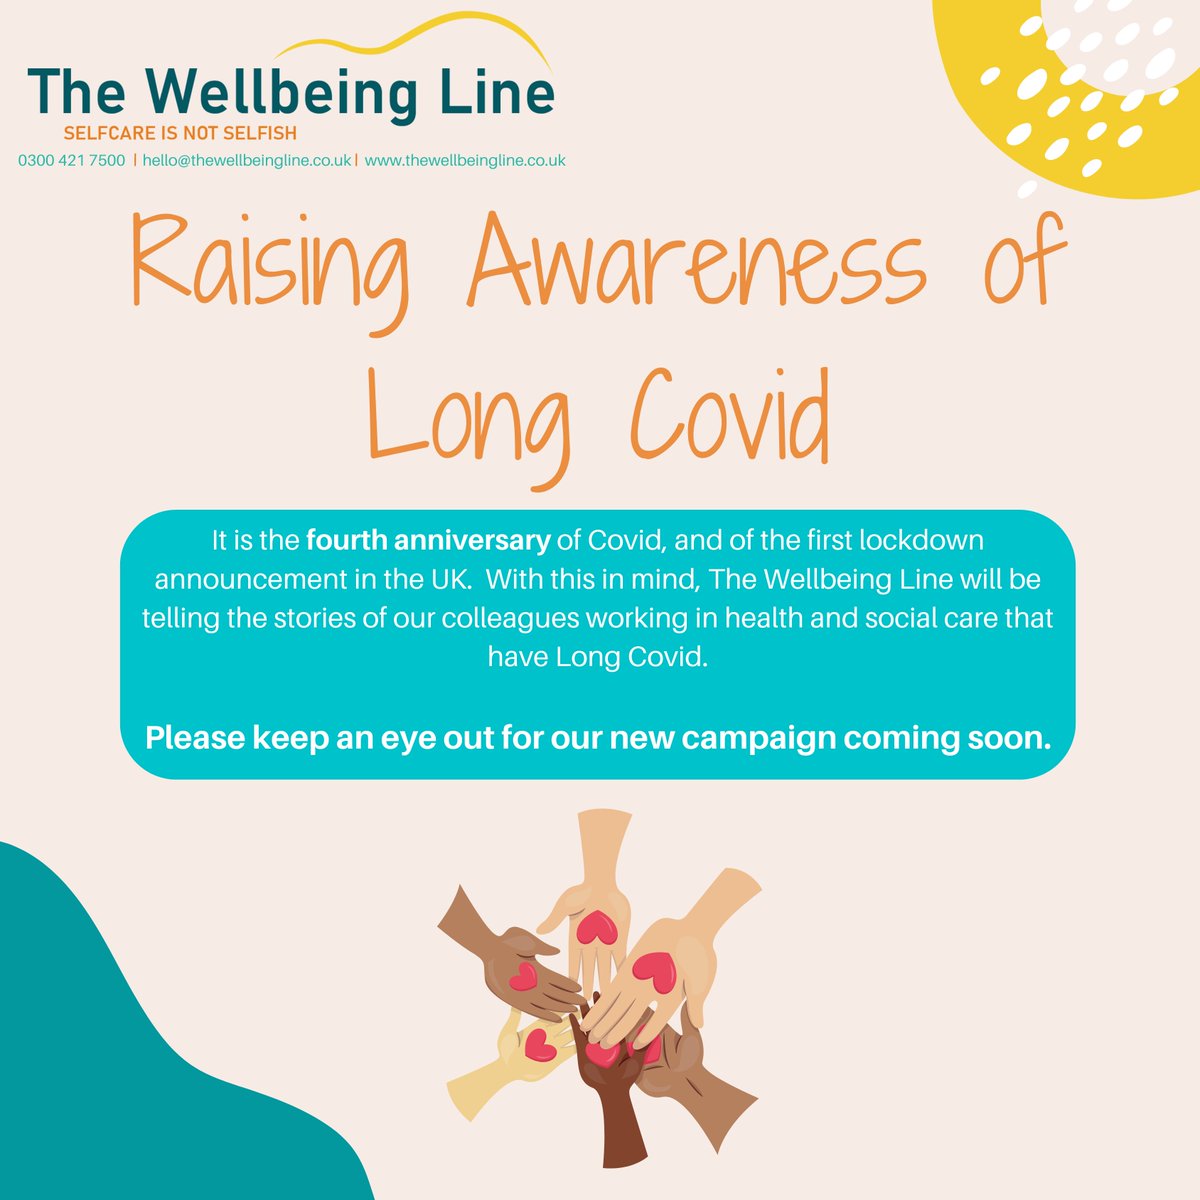 It is the fourth anniversary of Covid, and of the first lockdown announcement in the UK. We want to raise awareness of the fact that Long Covid has not gone away. Keep an eye out for our new campaign coming soon ❤️